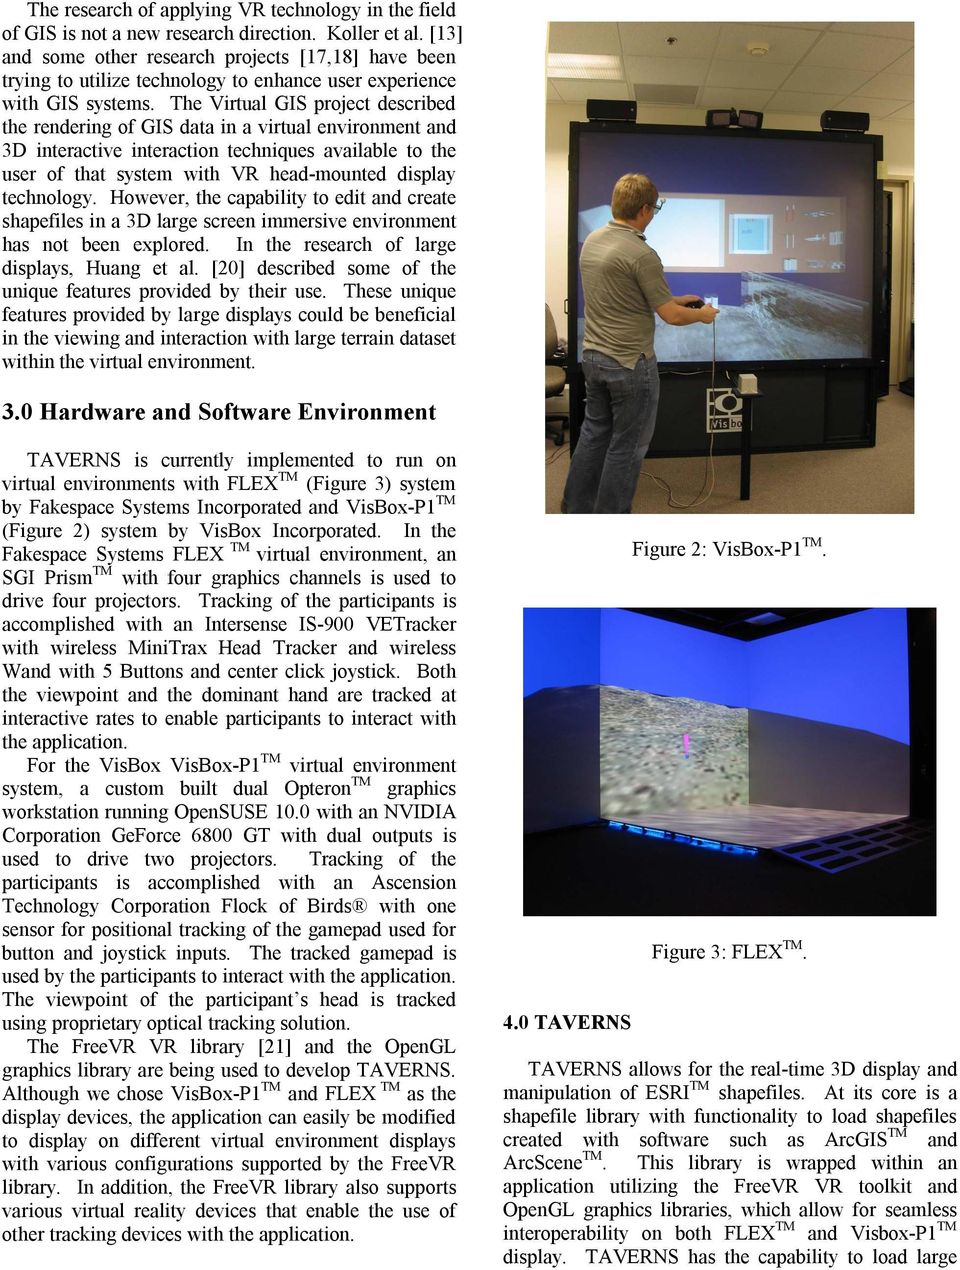 The Virtual GIS project described the rendering of GIS data in a virtual environment and 3D interactive interaction techniques available to the user of that system with VR head-mounted display